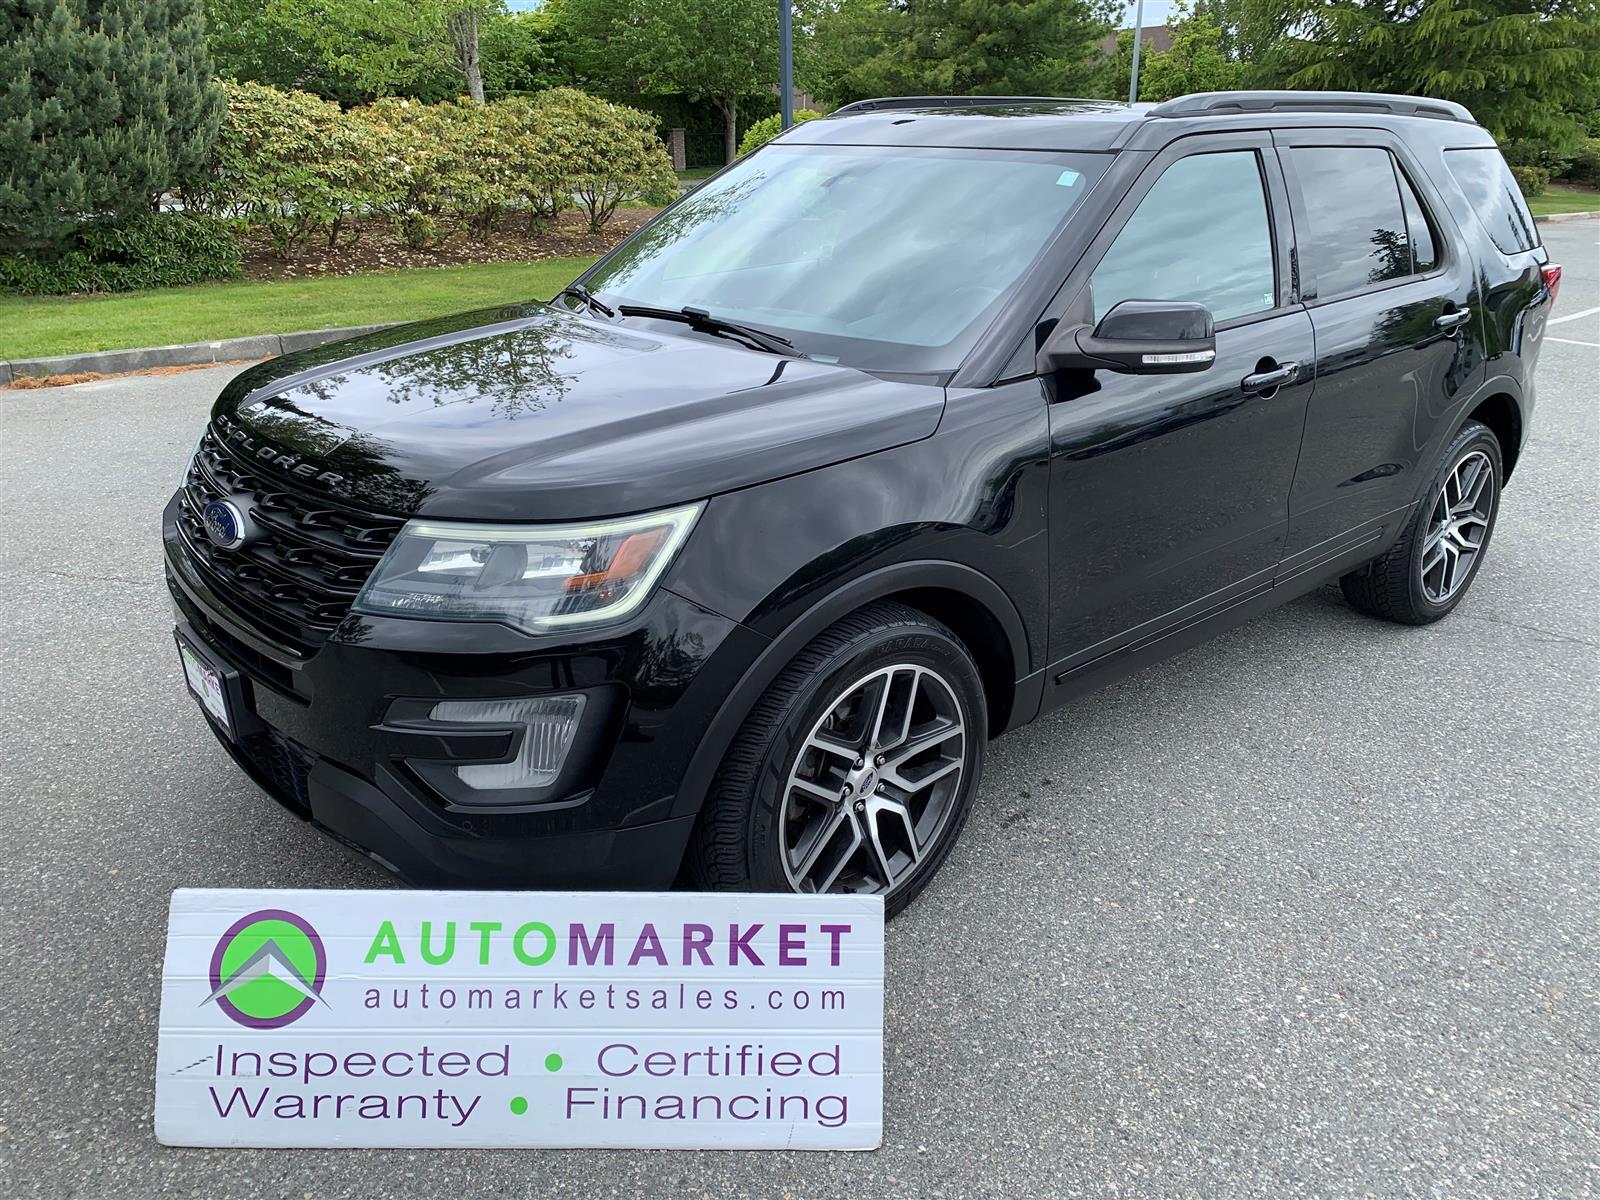 2016 Ford Explorer SPORT 4WD LEATHER, PANO ROOF, FINANCING, WARRANTY,